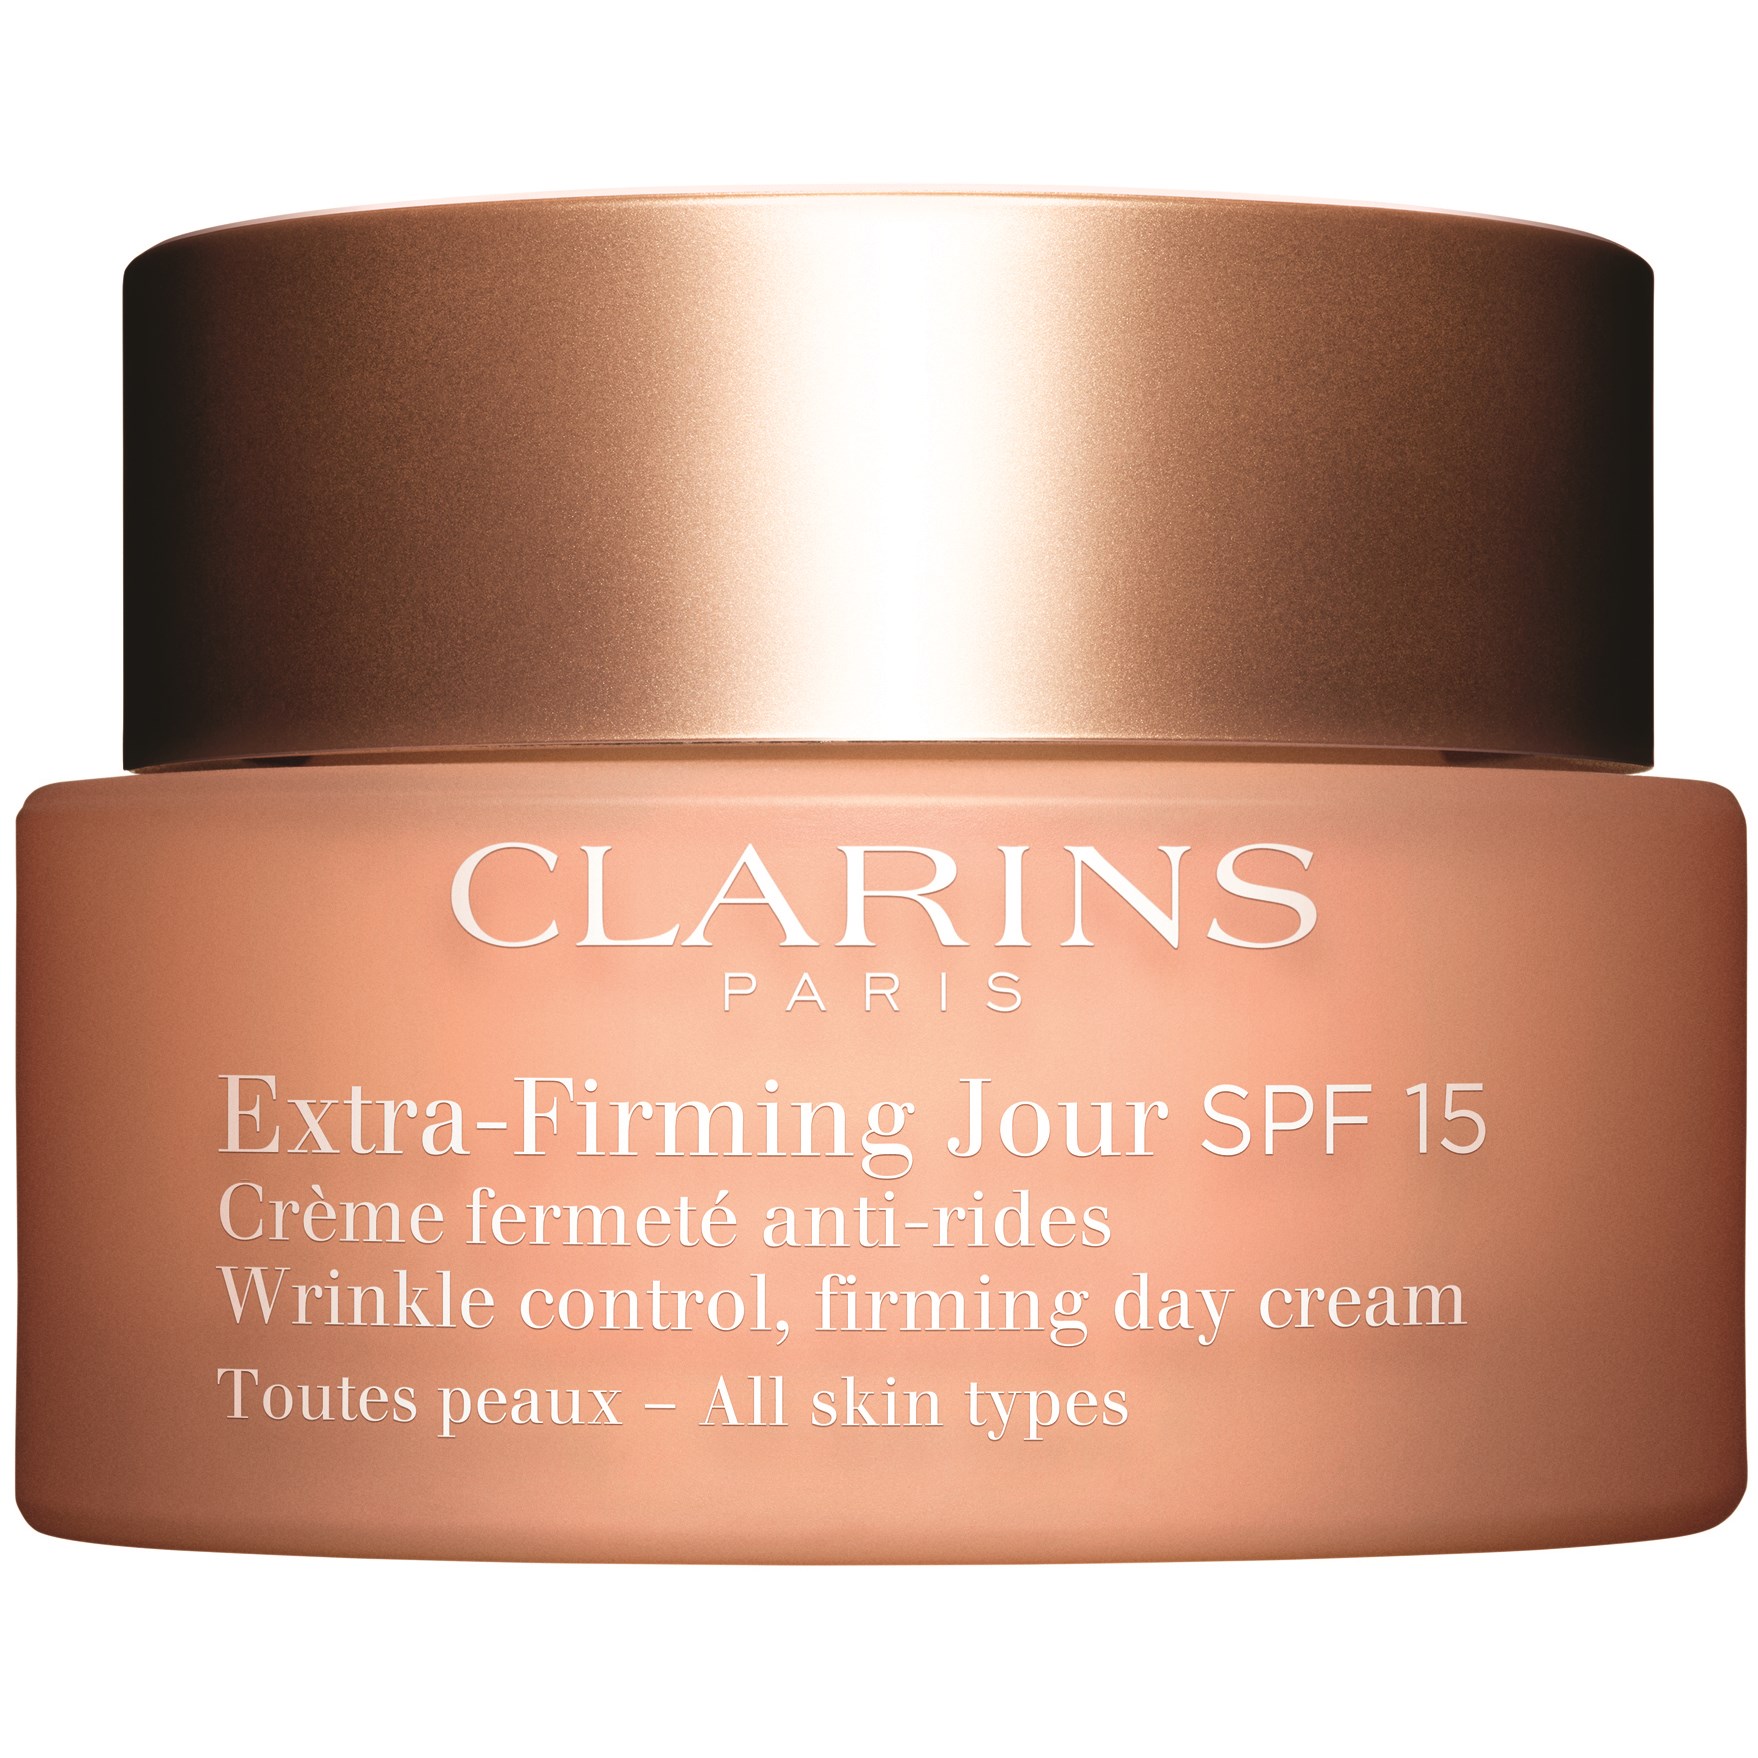 Clarins Extra-Firming Jour Spf 15 All skin types 50 ml